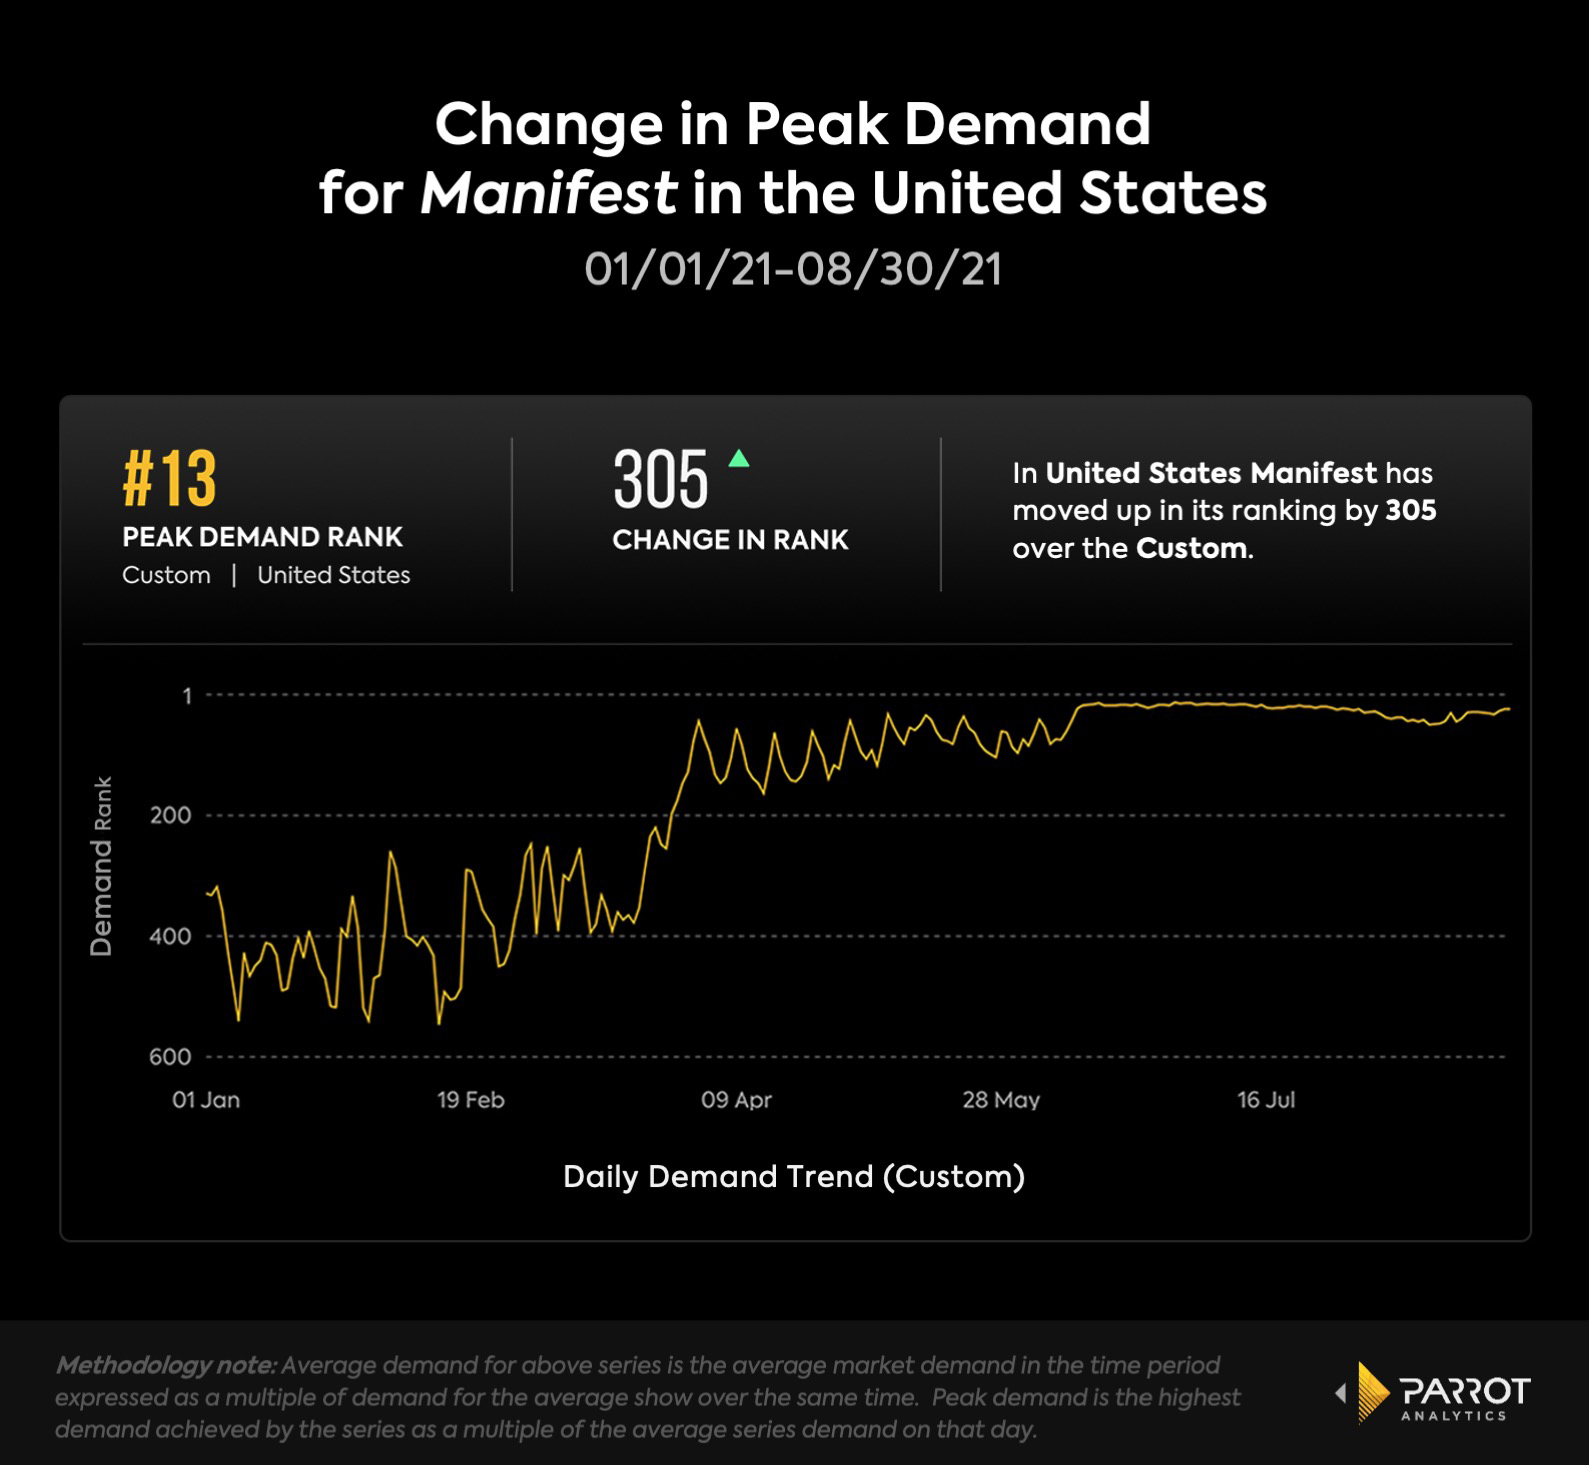 Parrot_Change in Peak Demand for Manifest in the United States.jpg